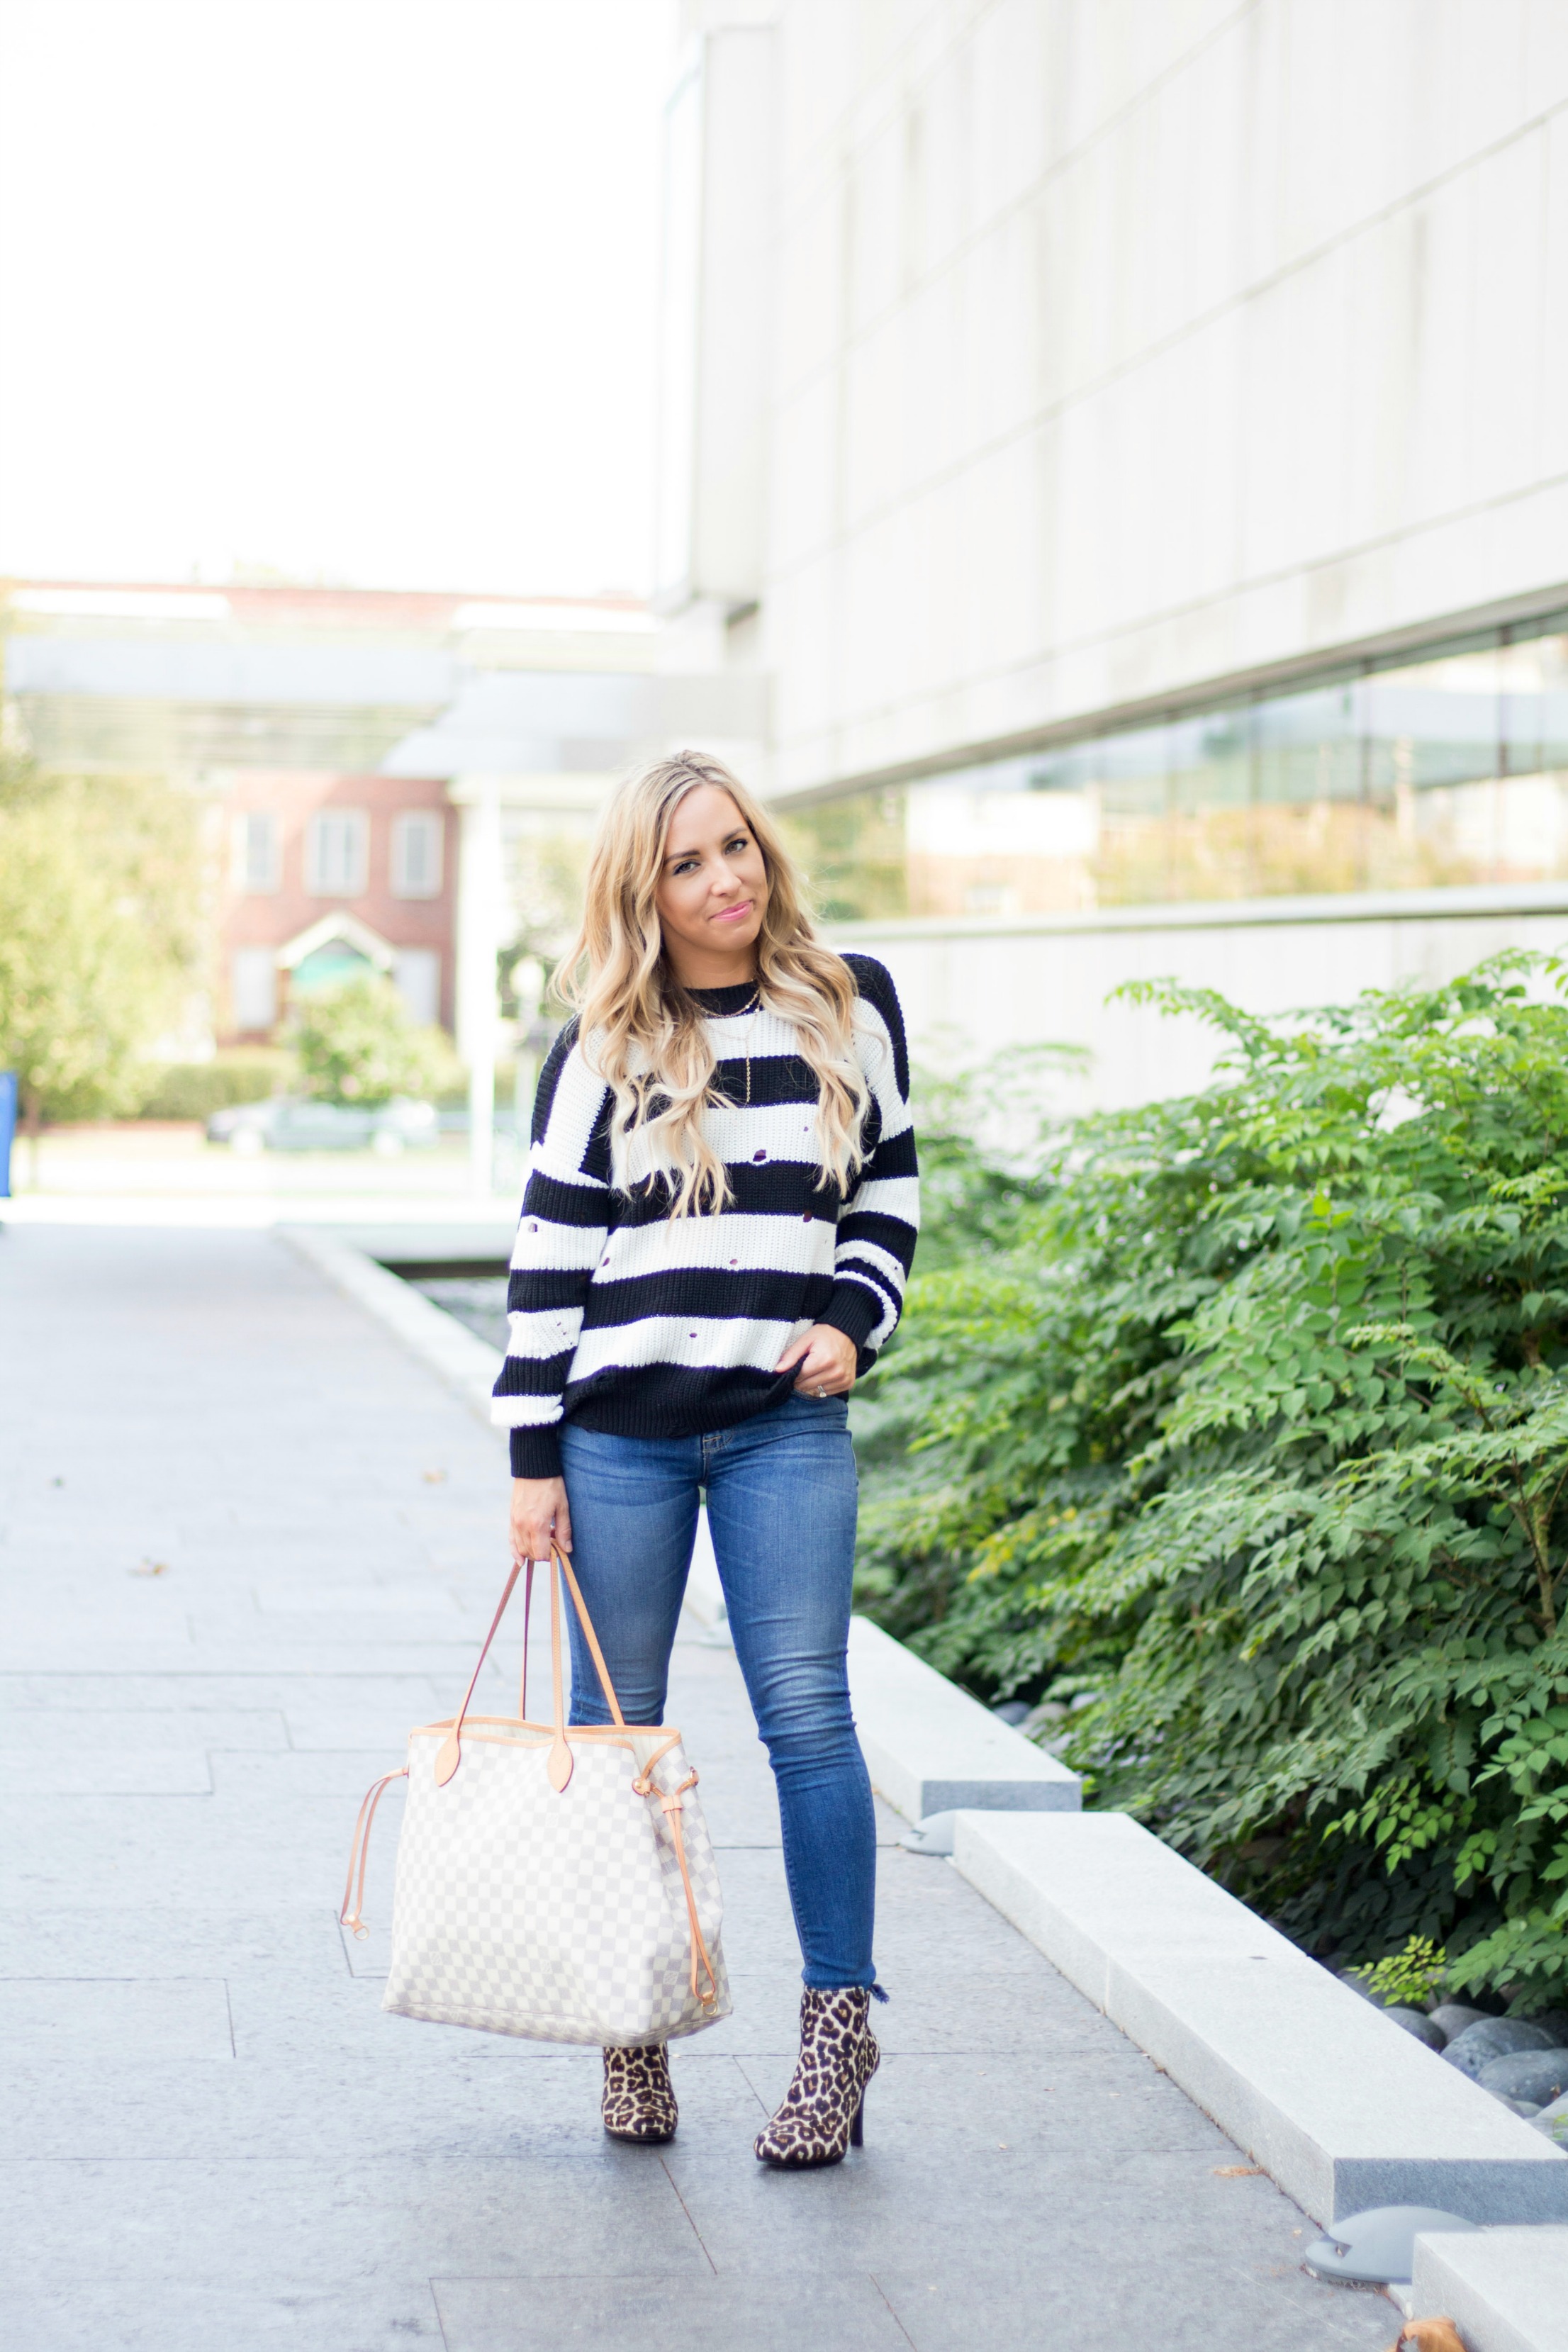 $20 Striped Pullover & Leopard Print Booties - According to Blaire